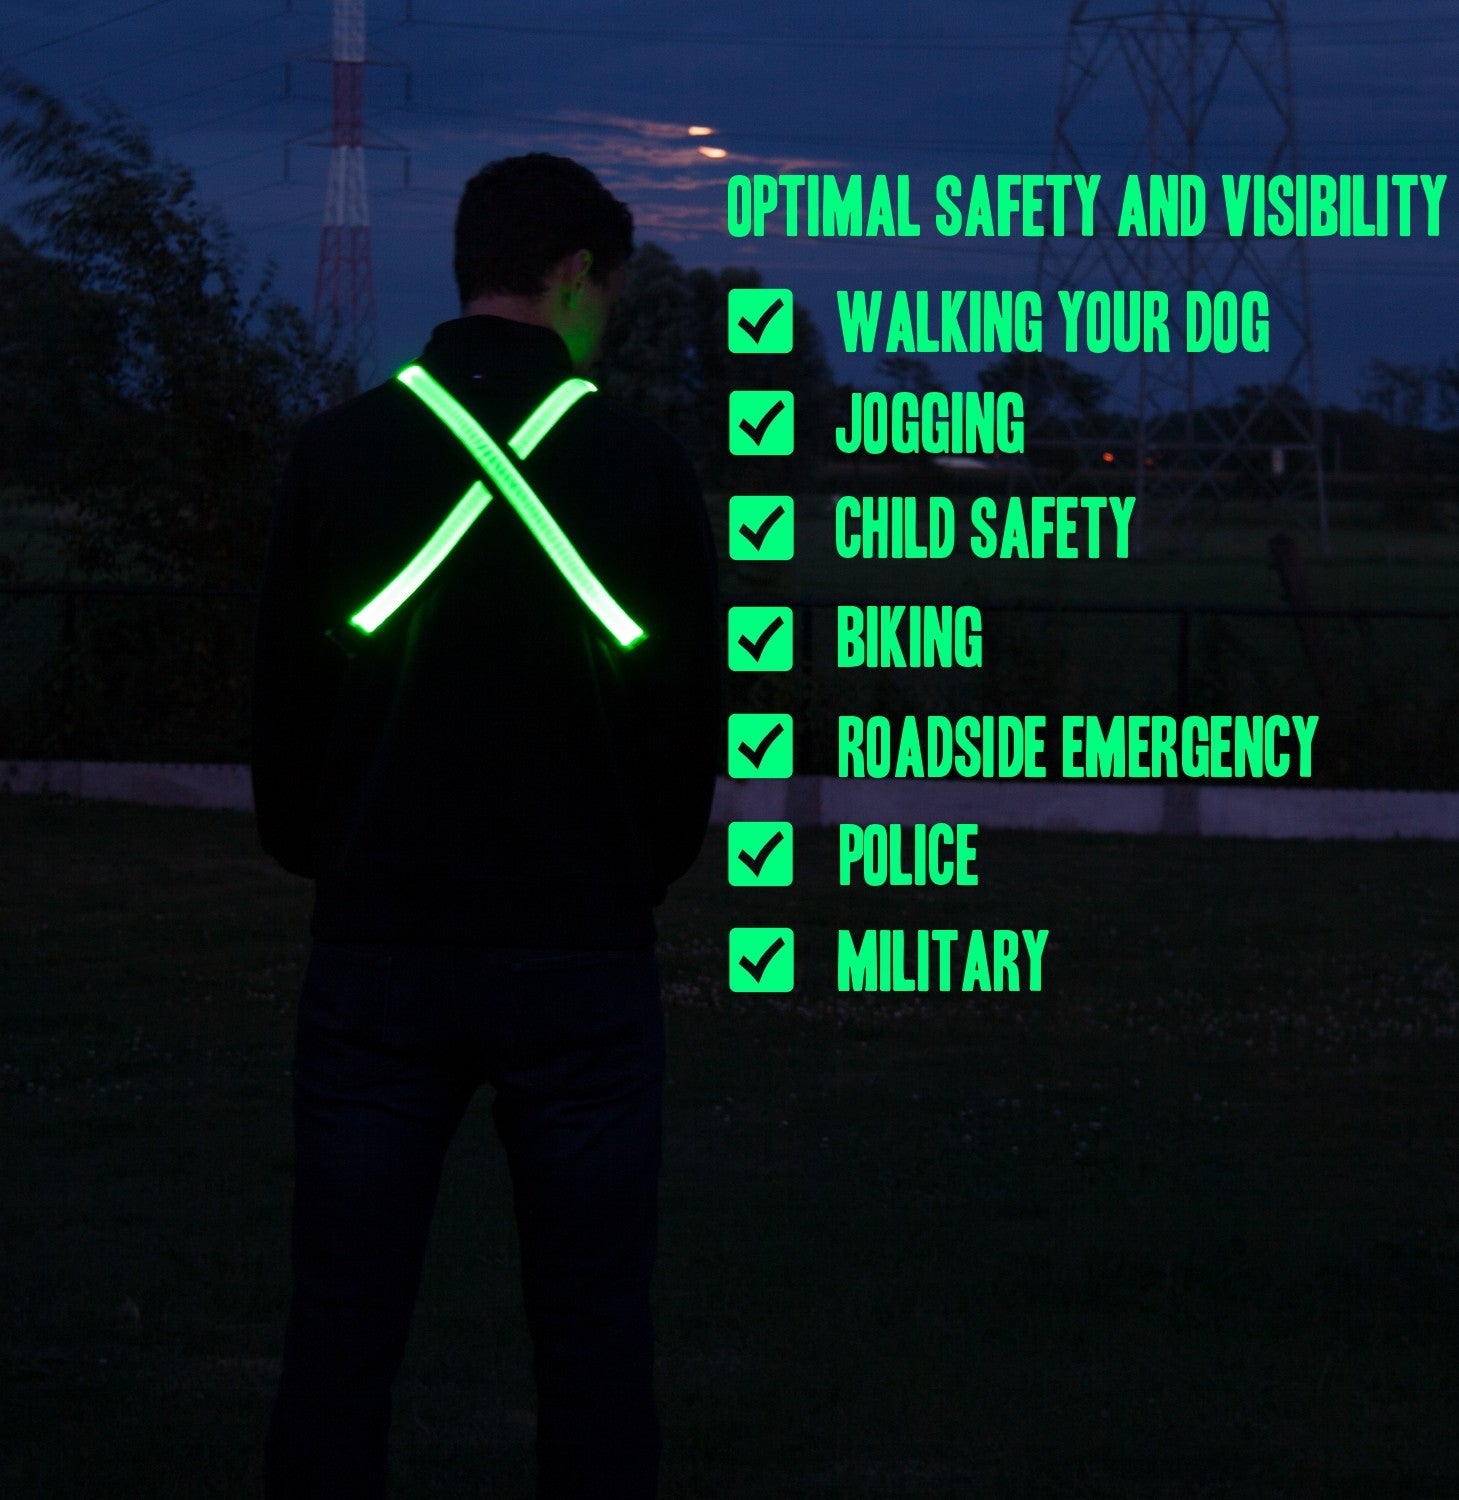 Led Reflective Belt Sash For Walking At Night,rechargeable Led Running Belt  For Runners Walkers,pin